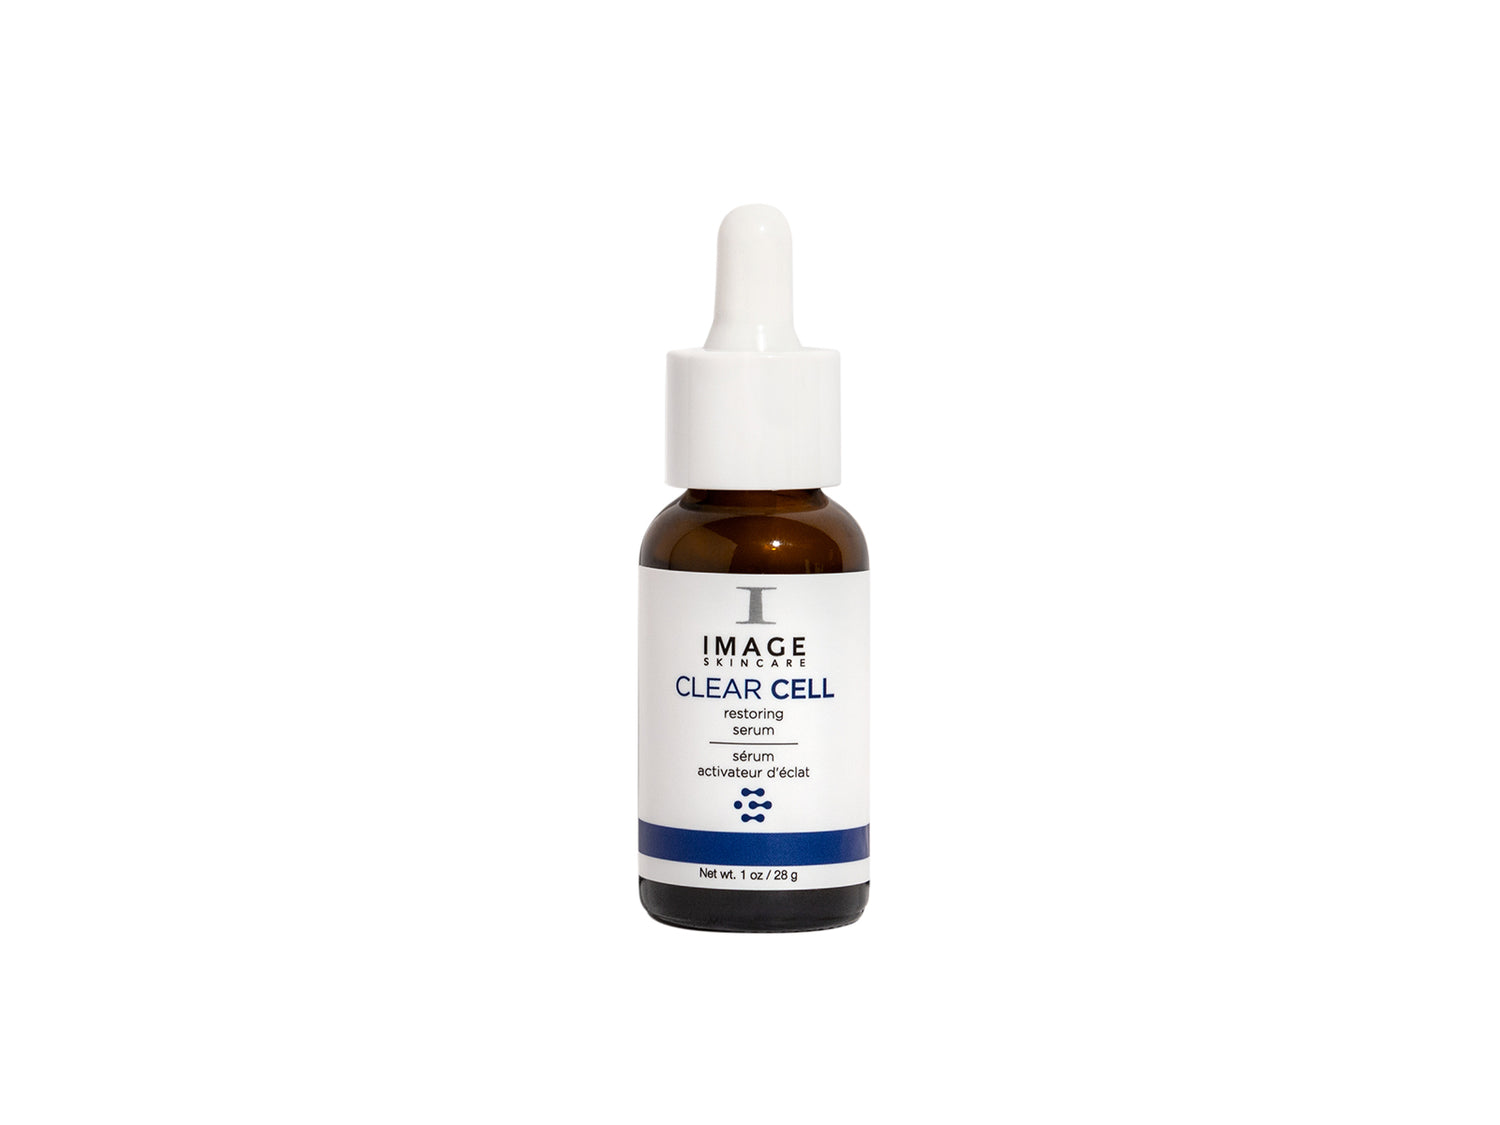 Clear cell restoring serum